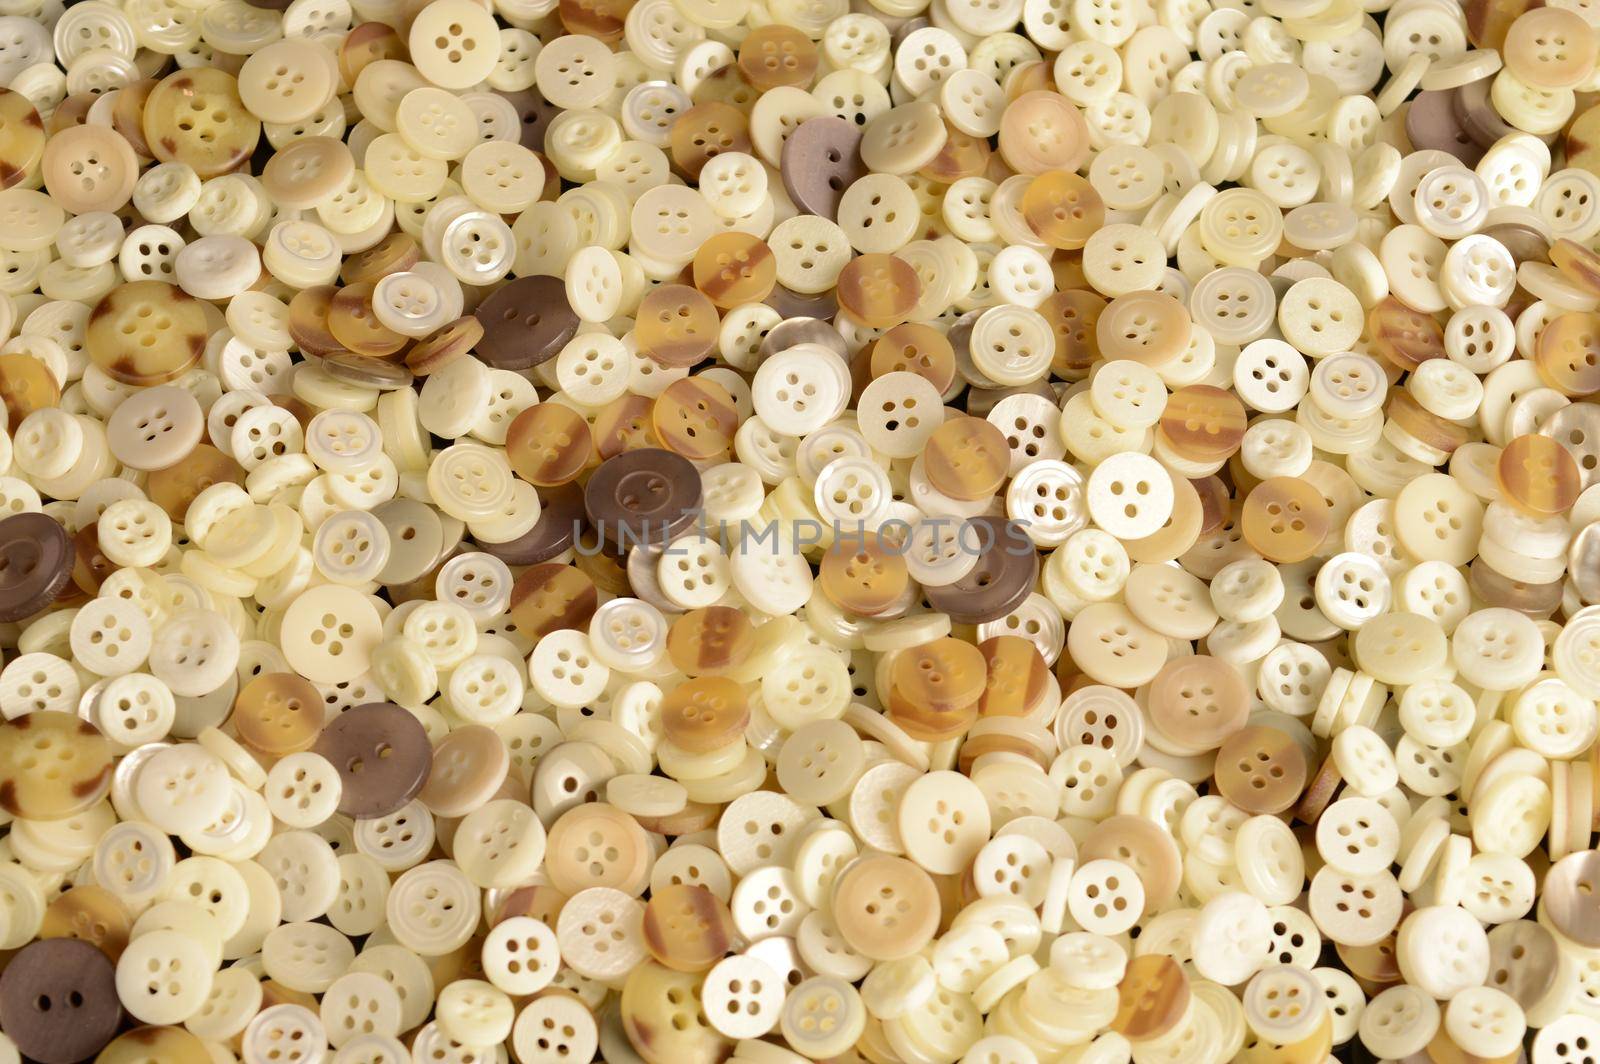 A macro shot of many buttons to create a full frame background image.